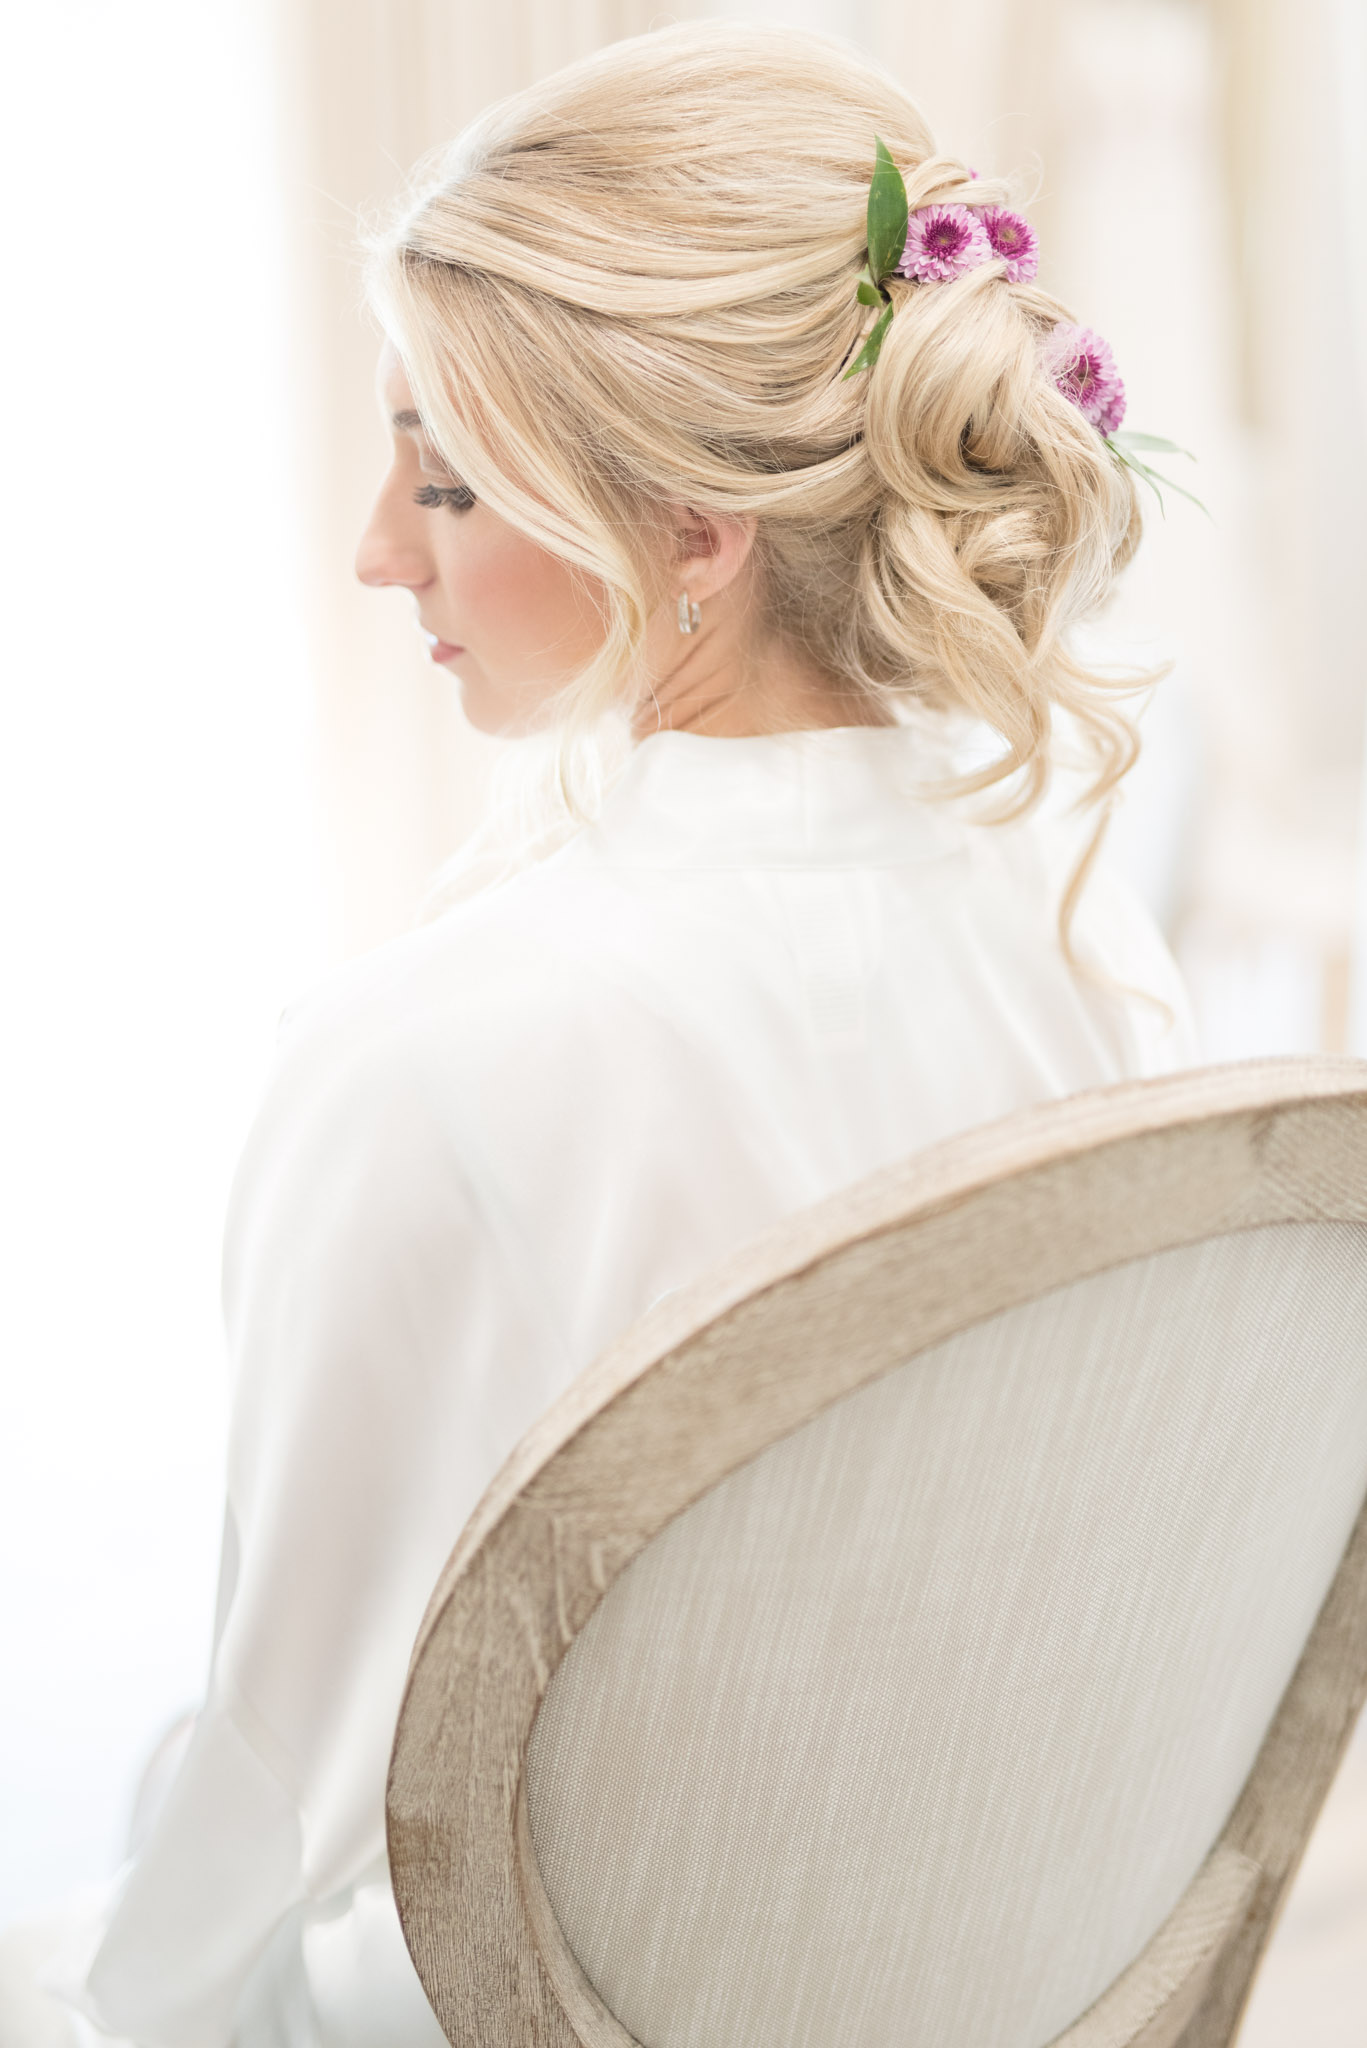 Bride looks over shoulder while getting hair done.